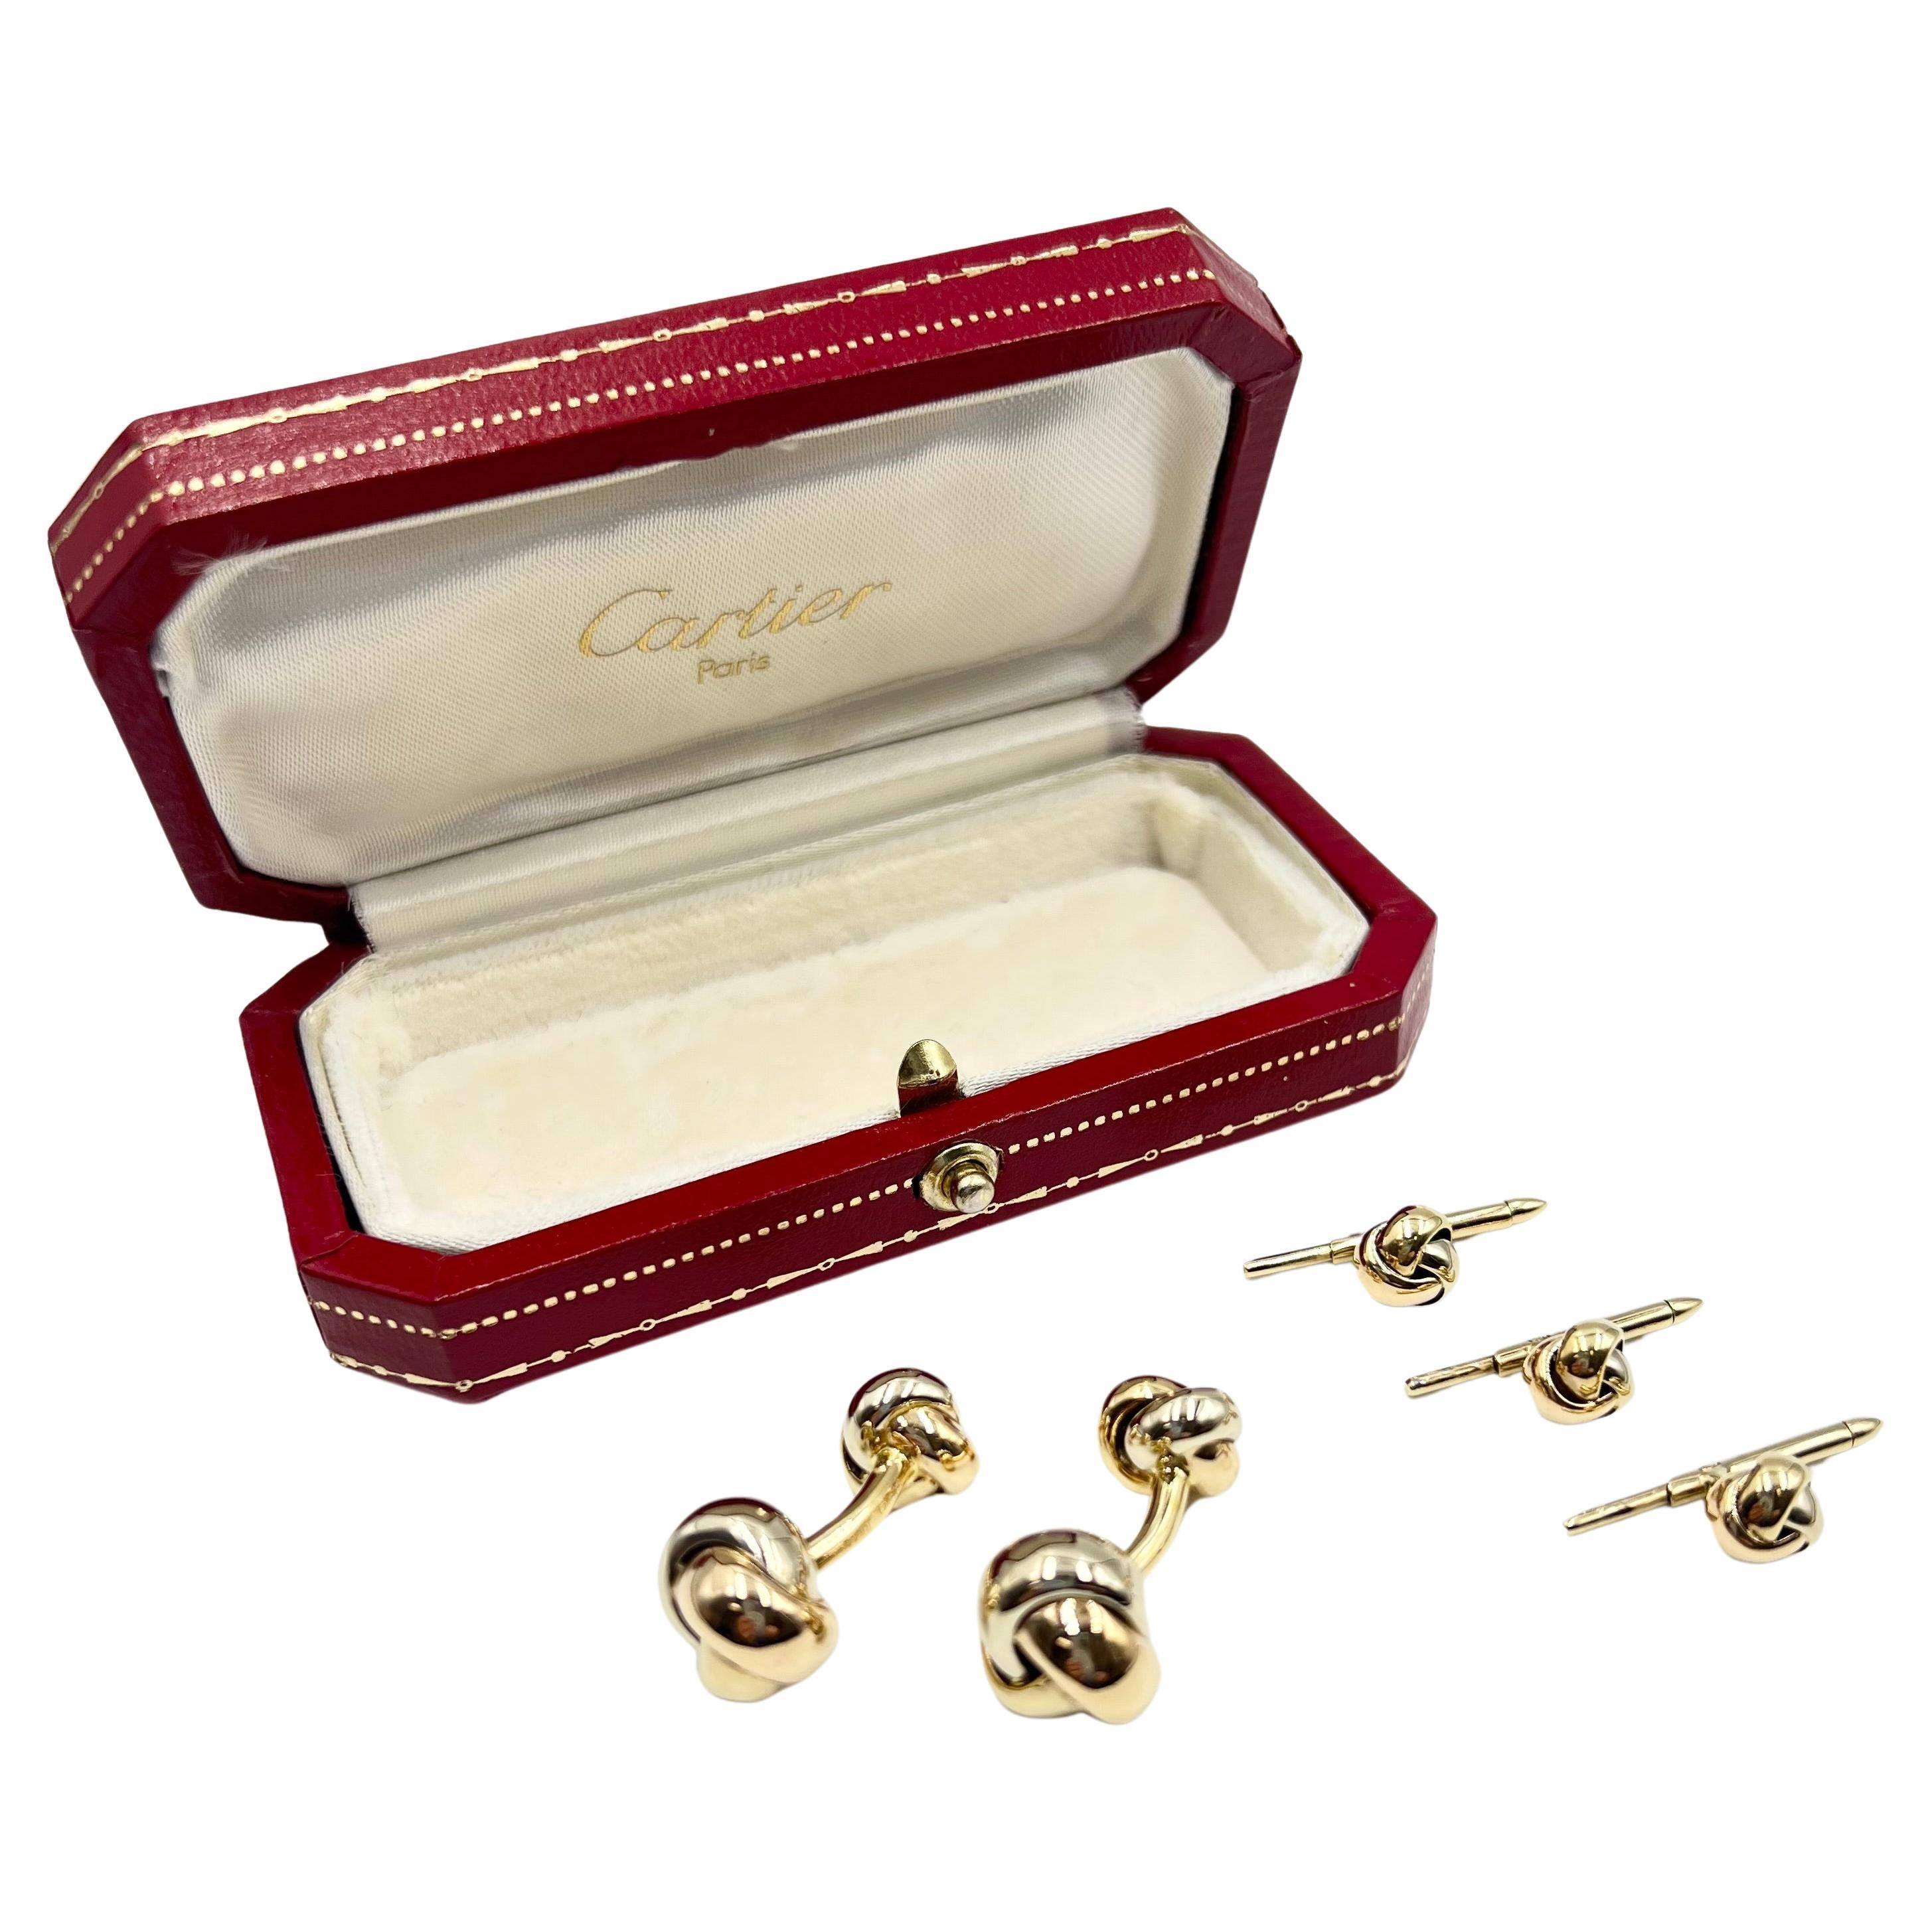 Cartier vintage 18k tricolored gold knot cufflink and shirt stud dress set. The cufflinks feature curved yellow gold bar centers with polished knots in rose, white, and yellow gold. The three matching shirt studs showcase matching miniature rose,